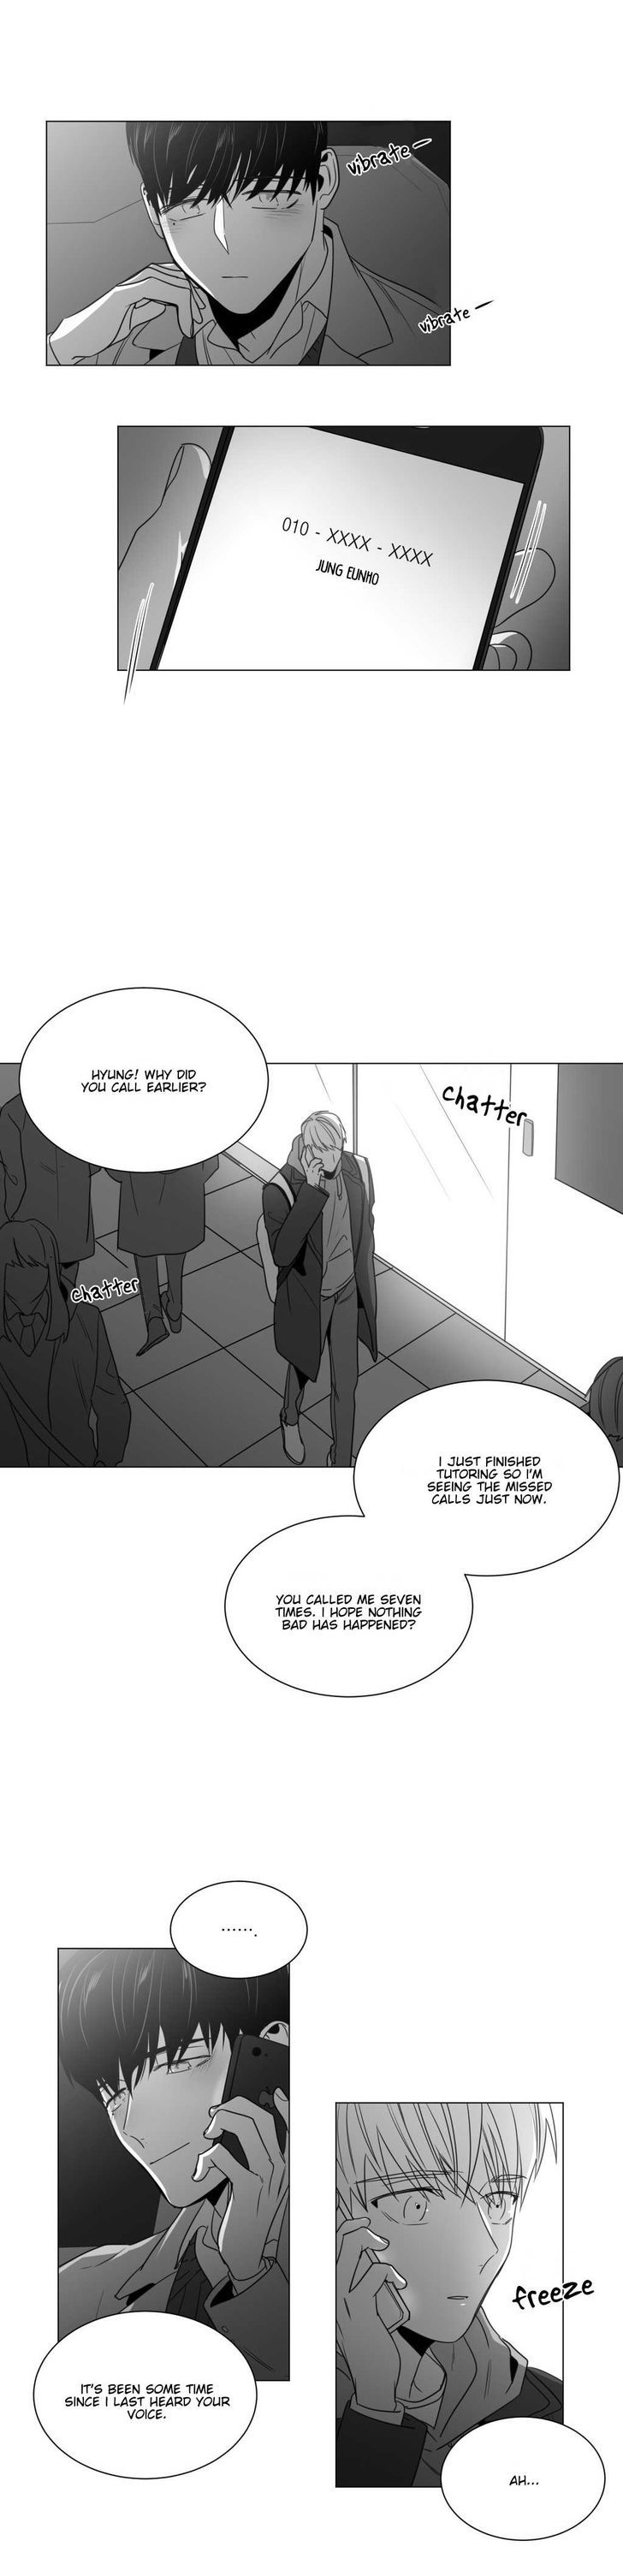 Lover Boy (Lezhin) Chapter 028 page 16